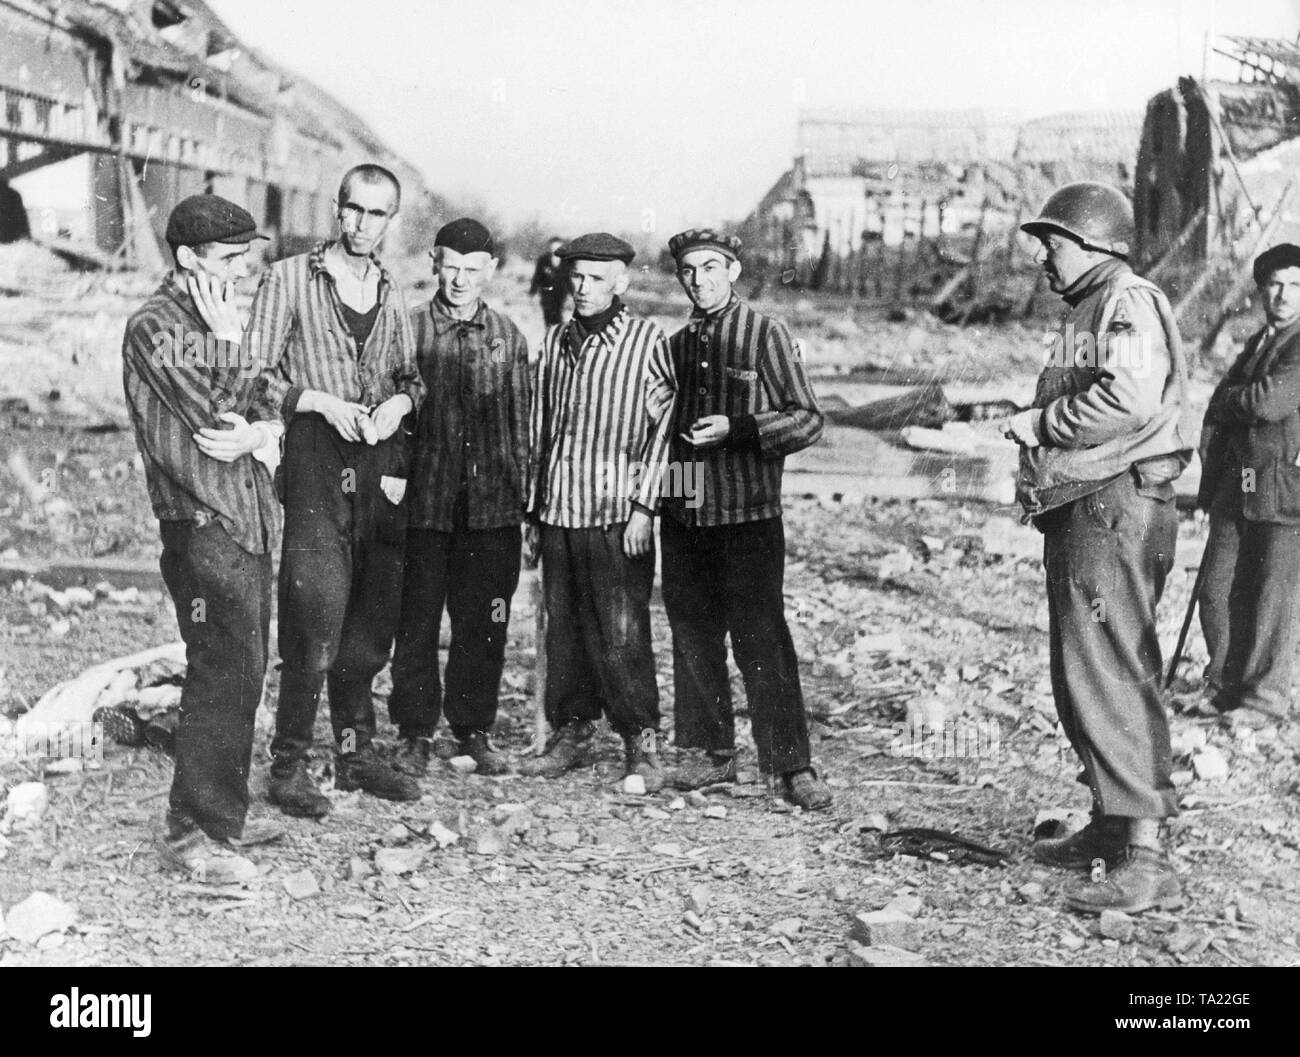 Prisoners in the liberated concentration camp in Nordhausen. Prisoners in the Nordhausen camp had to work on the completion of the V1 and V2 in underground production sites in the Harz. Stock Photo